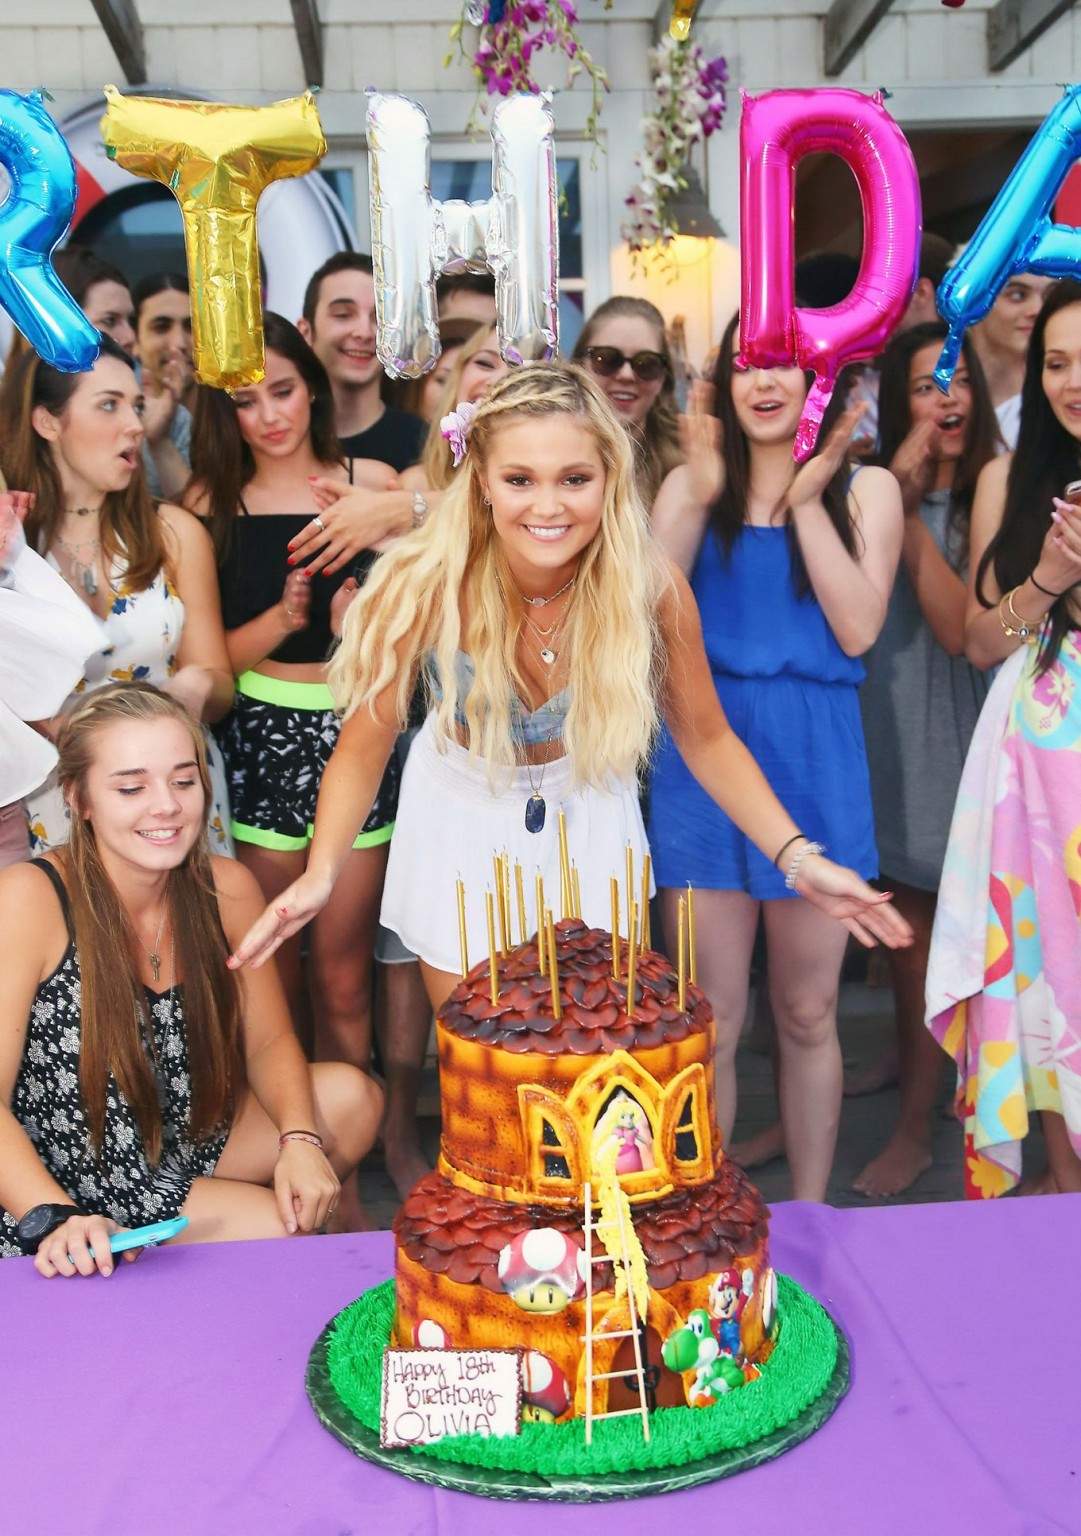 Olivia Holt looks hot in belly top and mini skirt for her bday #75154774